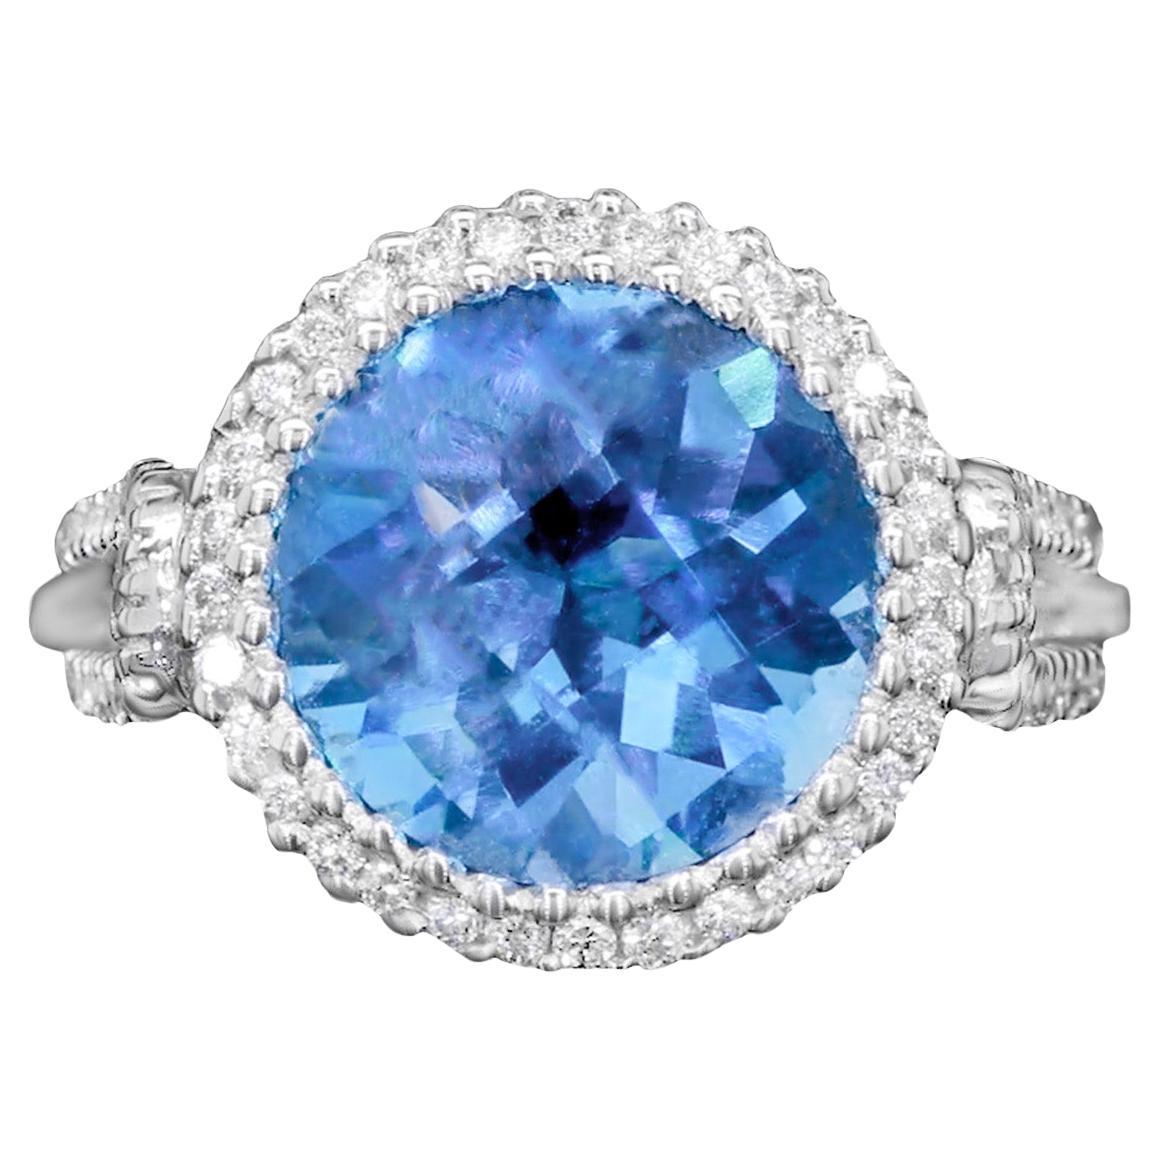 Swiss Blue Topaz Ring With Diamonds 3.79 Carats 18K White Gold For Sale